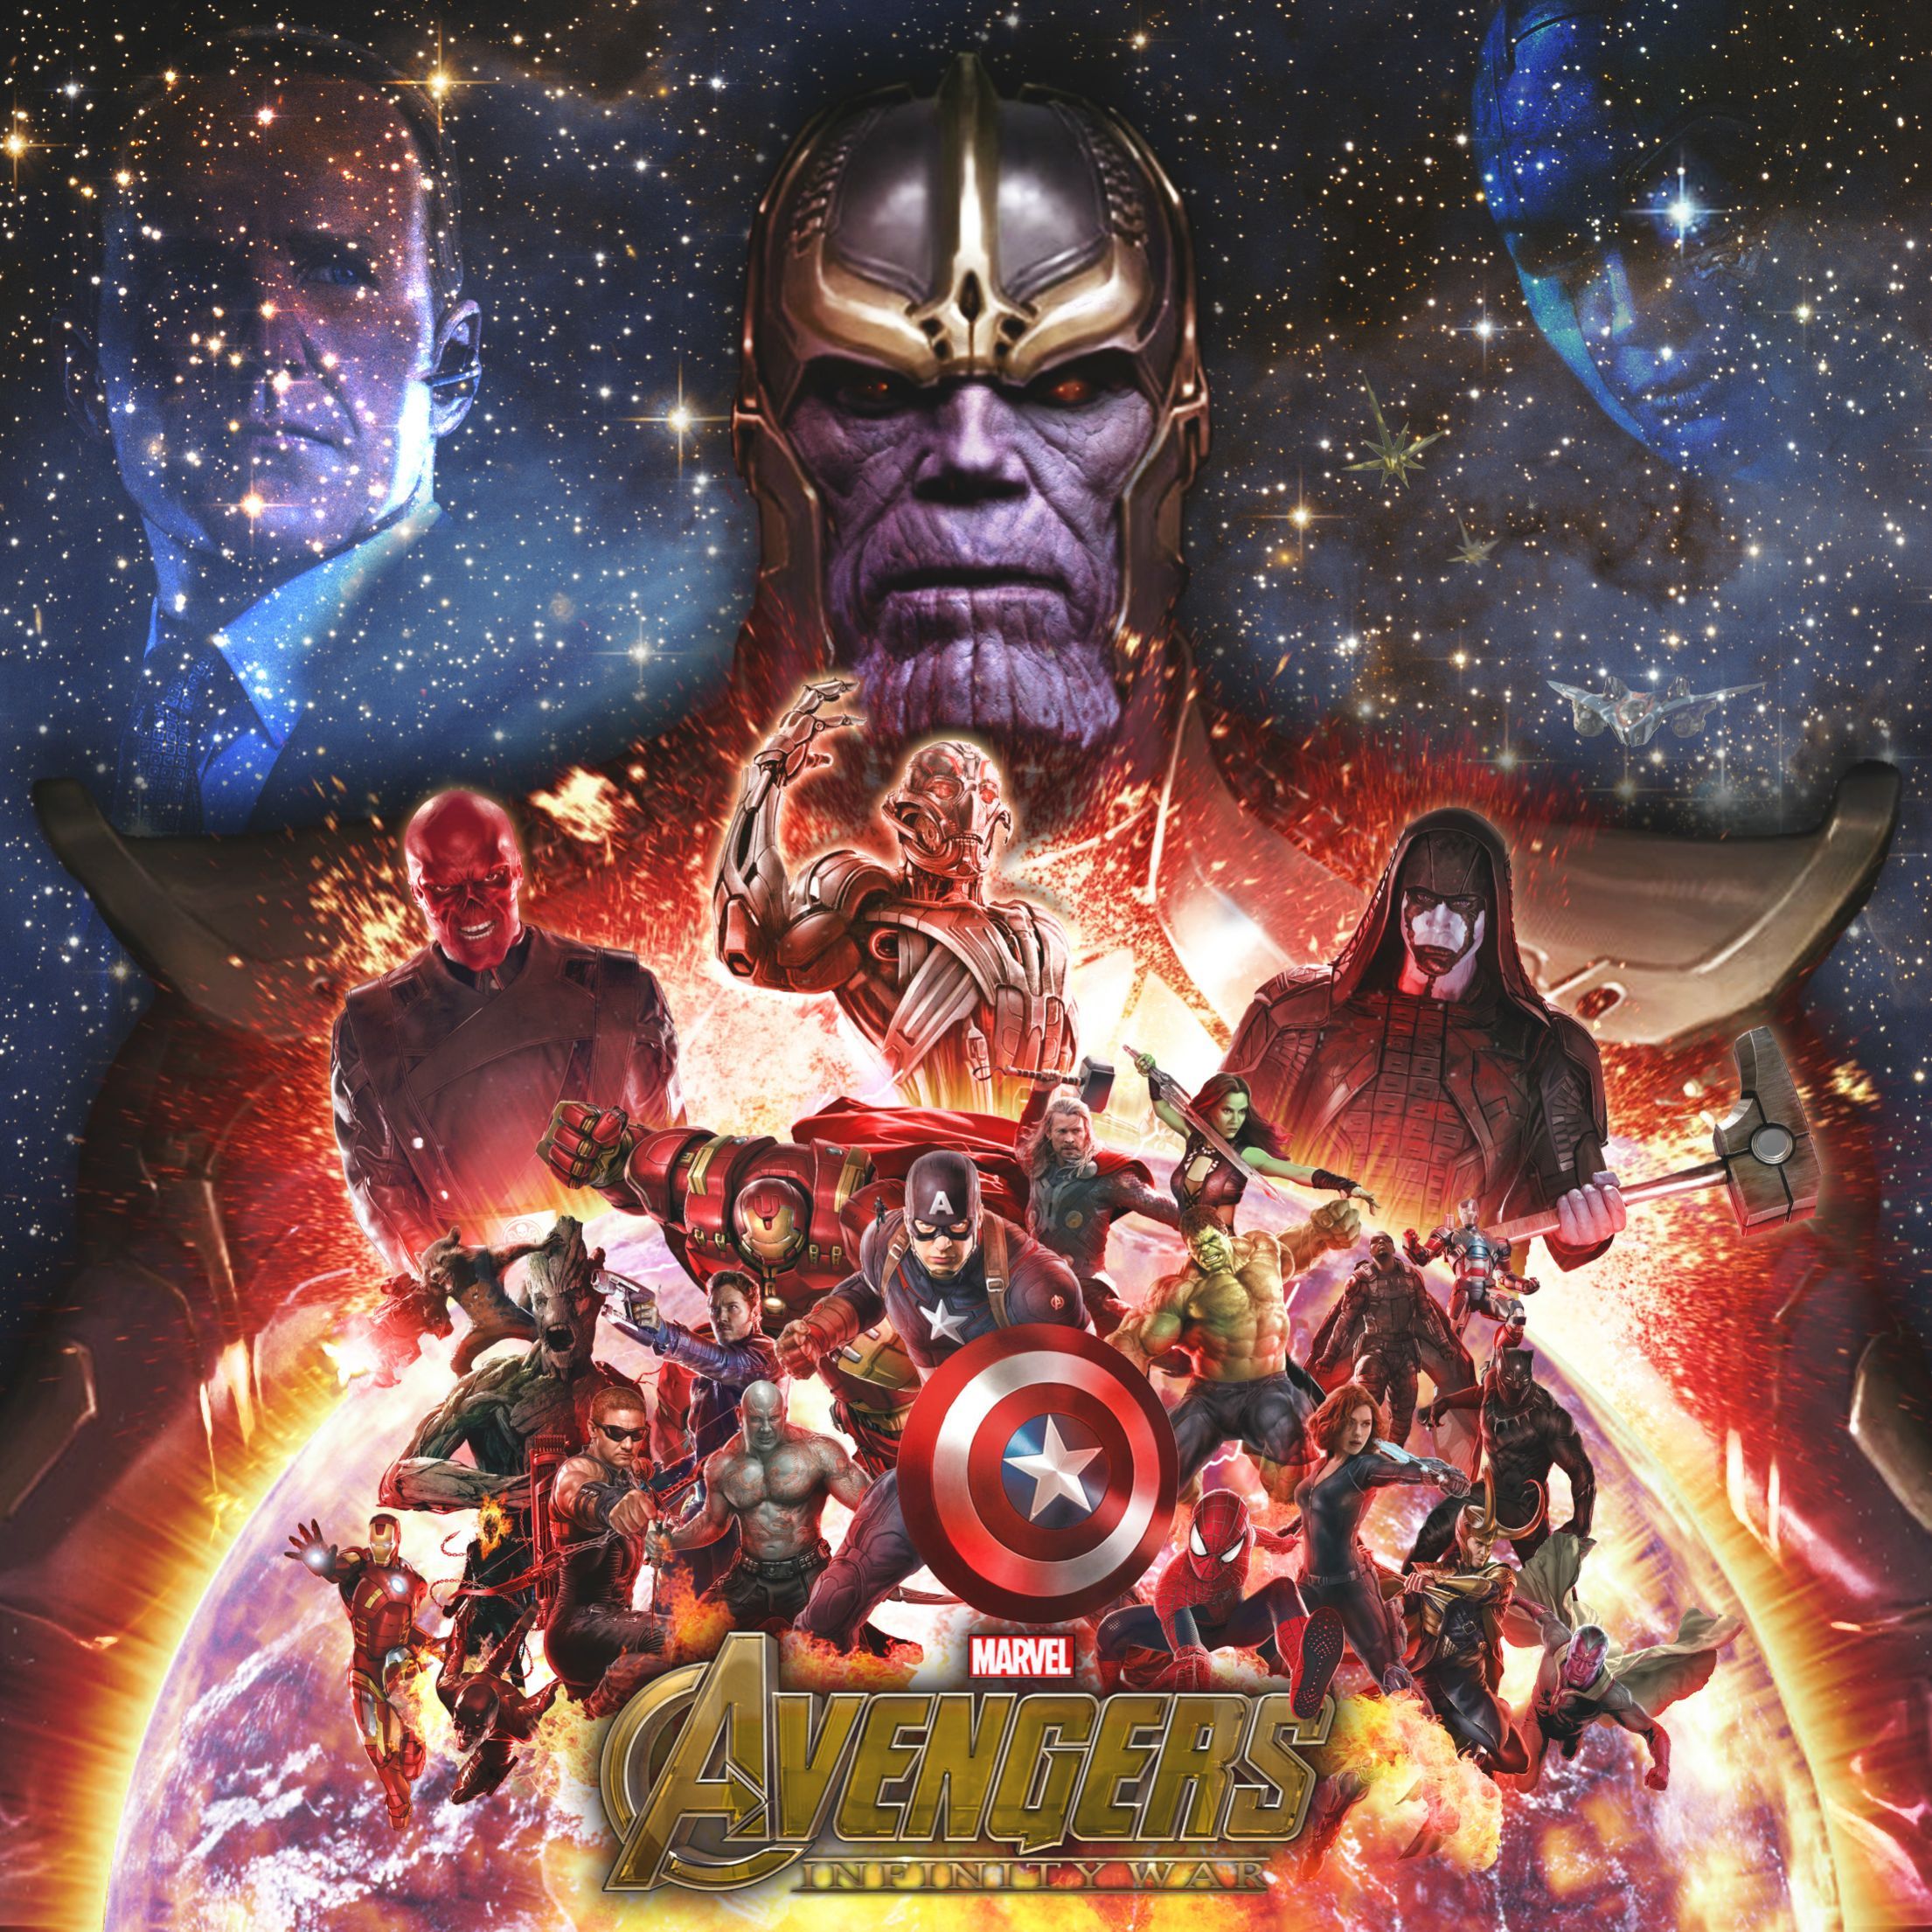 Thanos Avengers Infinity War Poster Wallpapers